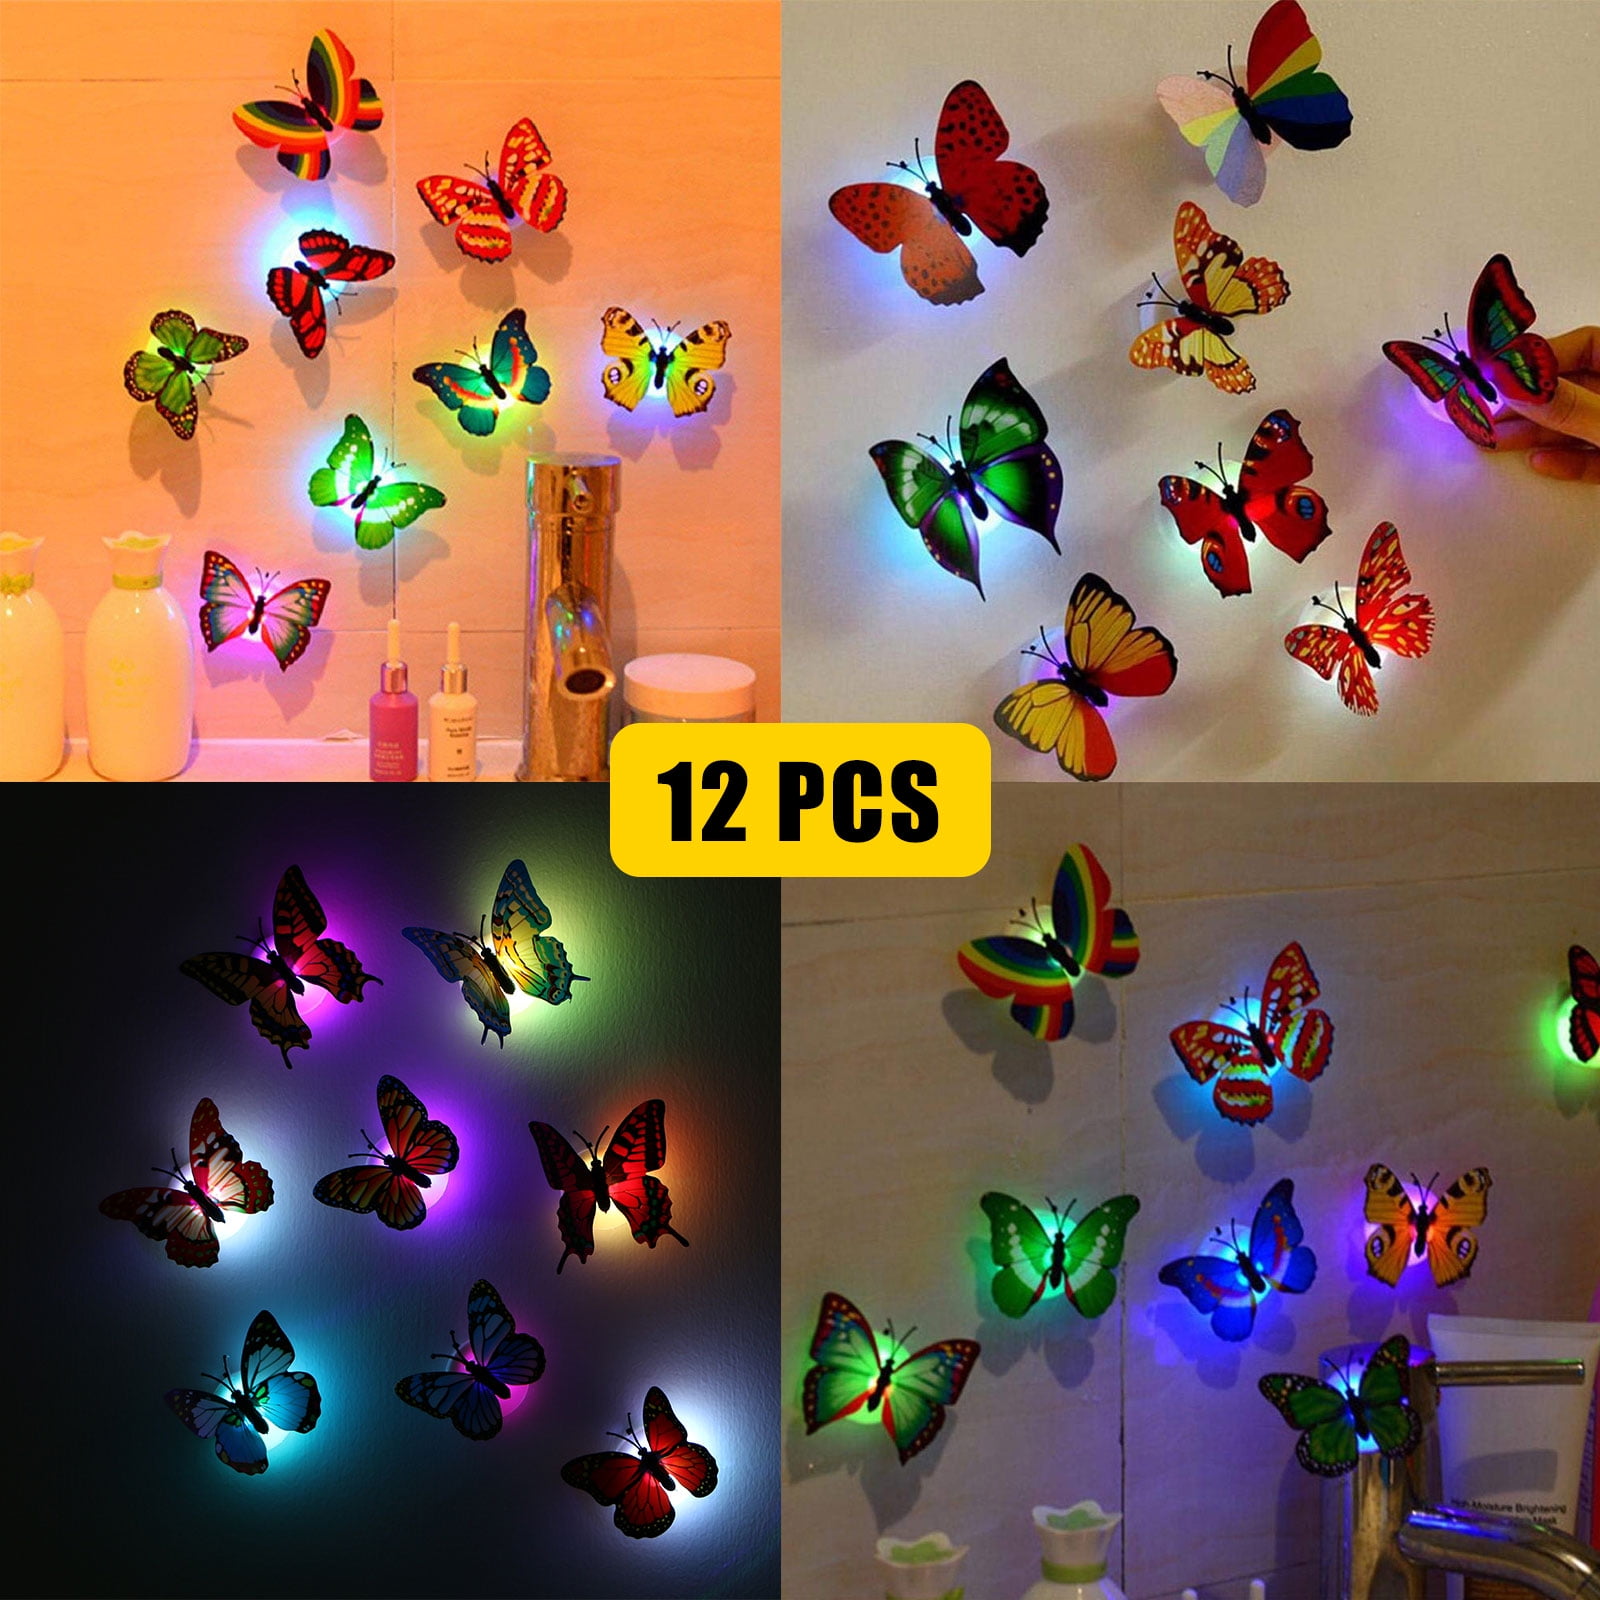 12pcs 3D Butterfly Wall Stickers Home Bedroom Decals Beauty Stickers DIY